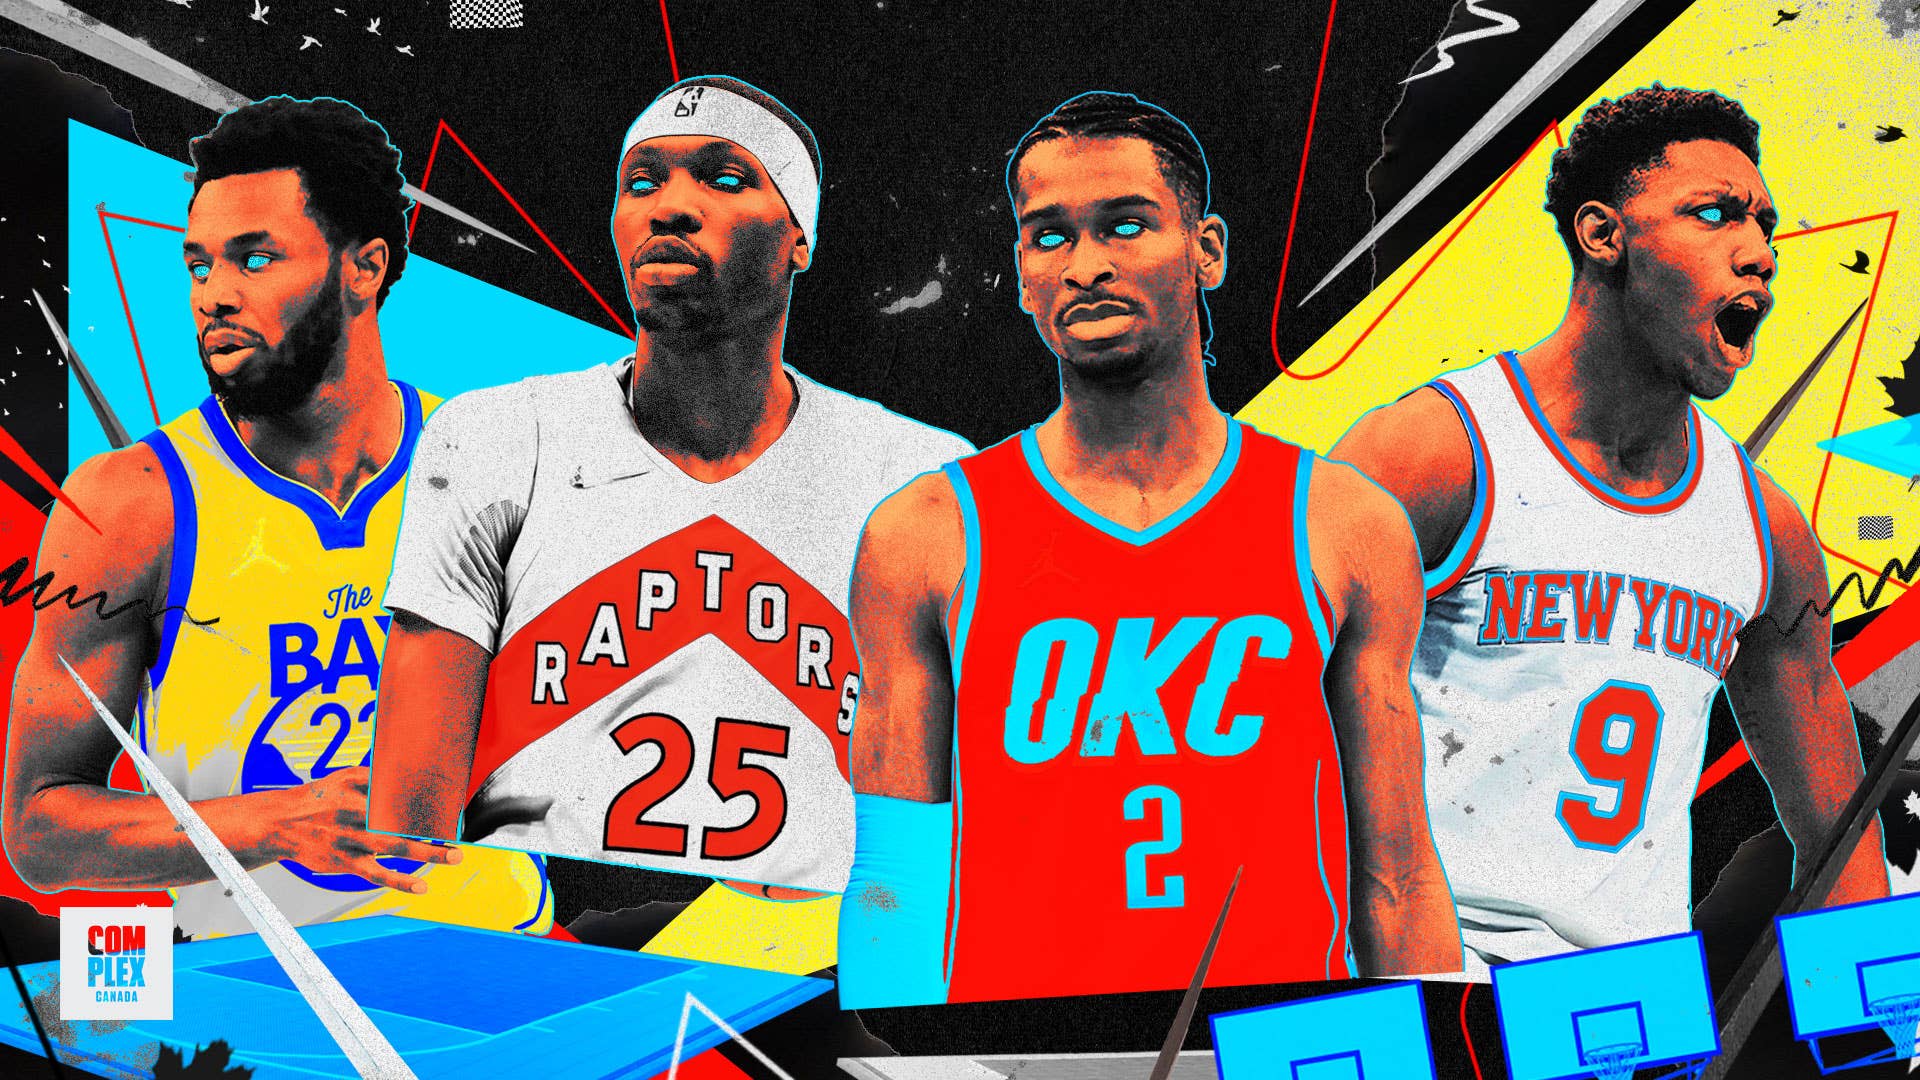 Andrew Wiggins, Chris Boucher, Shai Gilgeous-Alexander, and RJ Barrett appear in a stylized illustration